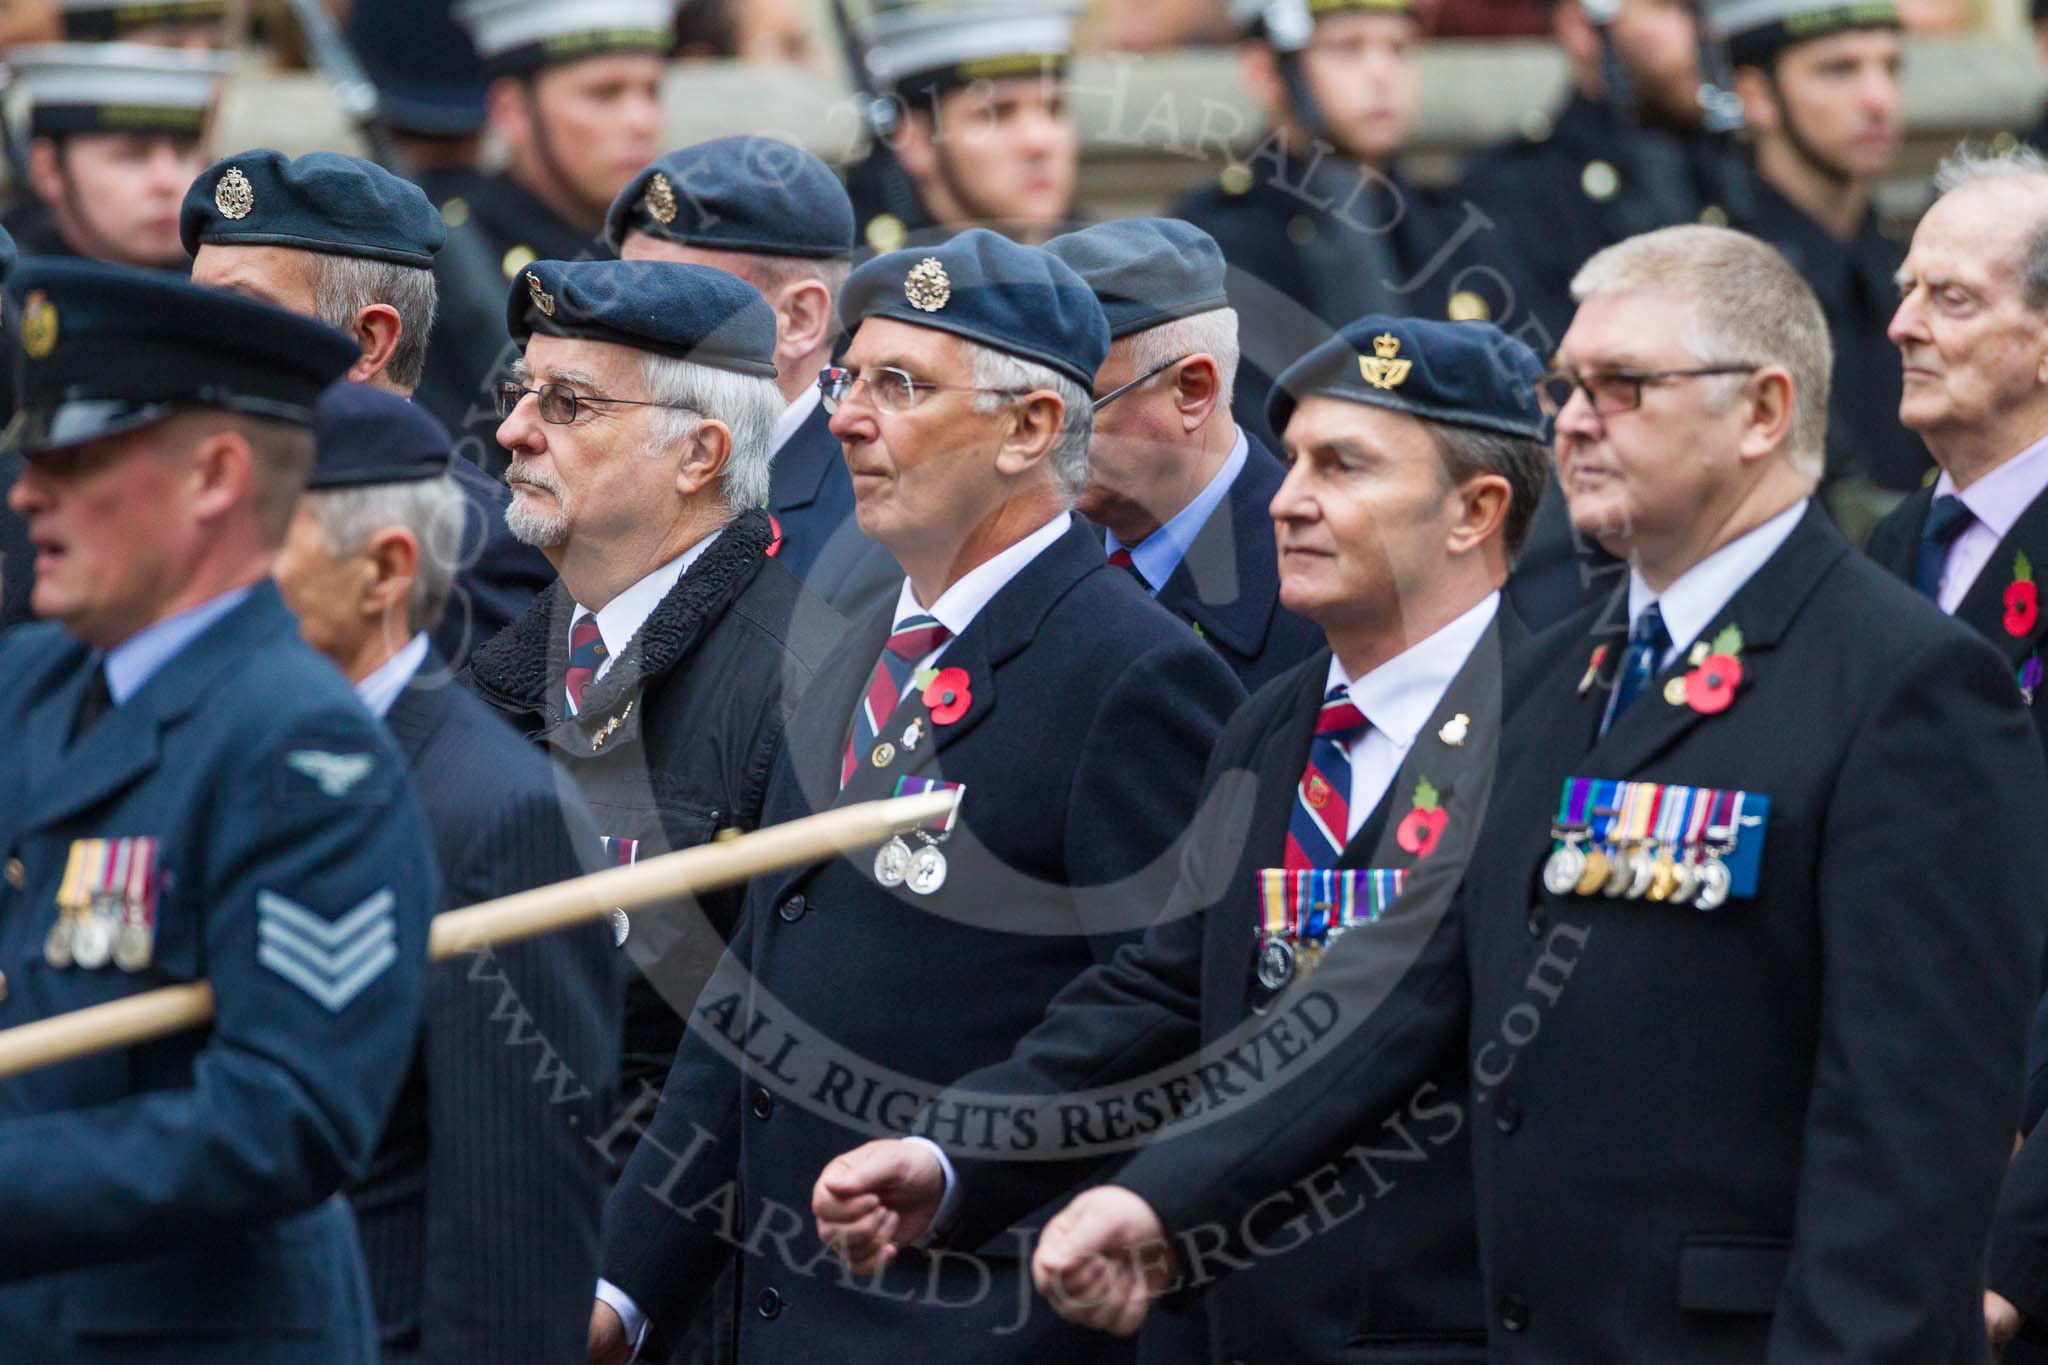 Remembrance Sunday at the Cenotaph 2015: Group C16, RAFSE(s) Assoc (New for 2015).
Cenotaph, Whitehall, London SW1,
London,
Greater London,
United Kingdom,
on 08 November 2015 at 11:49, image #517